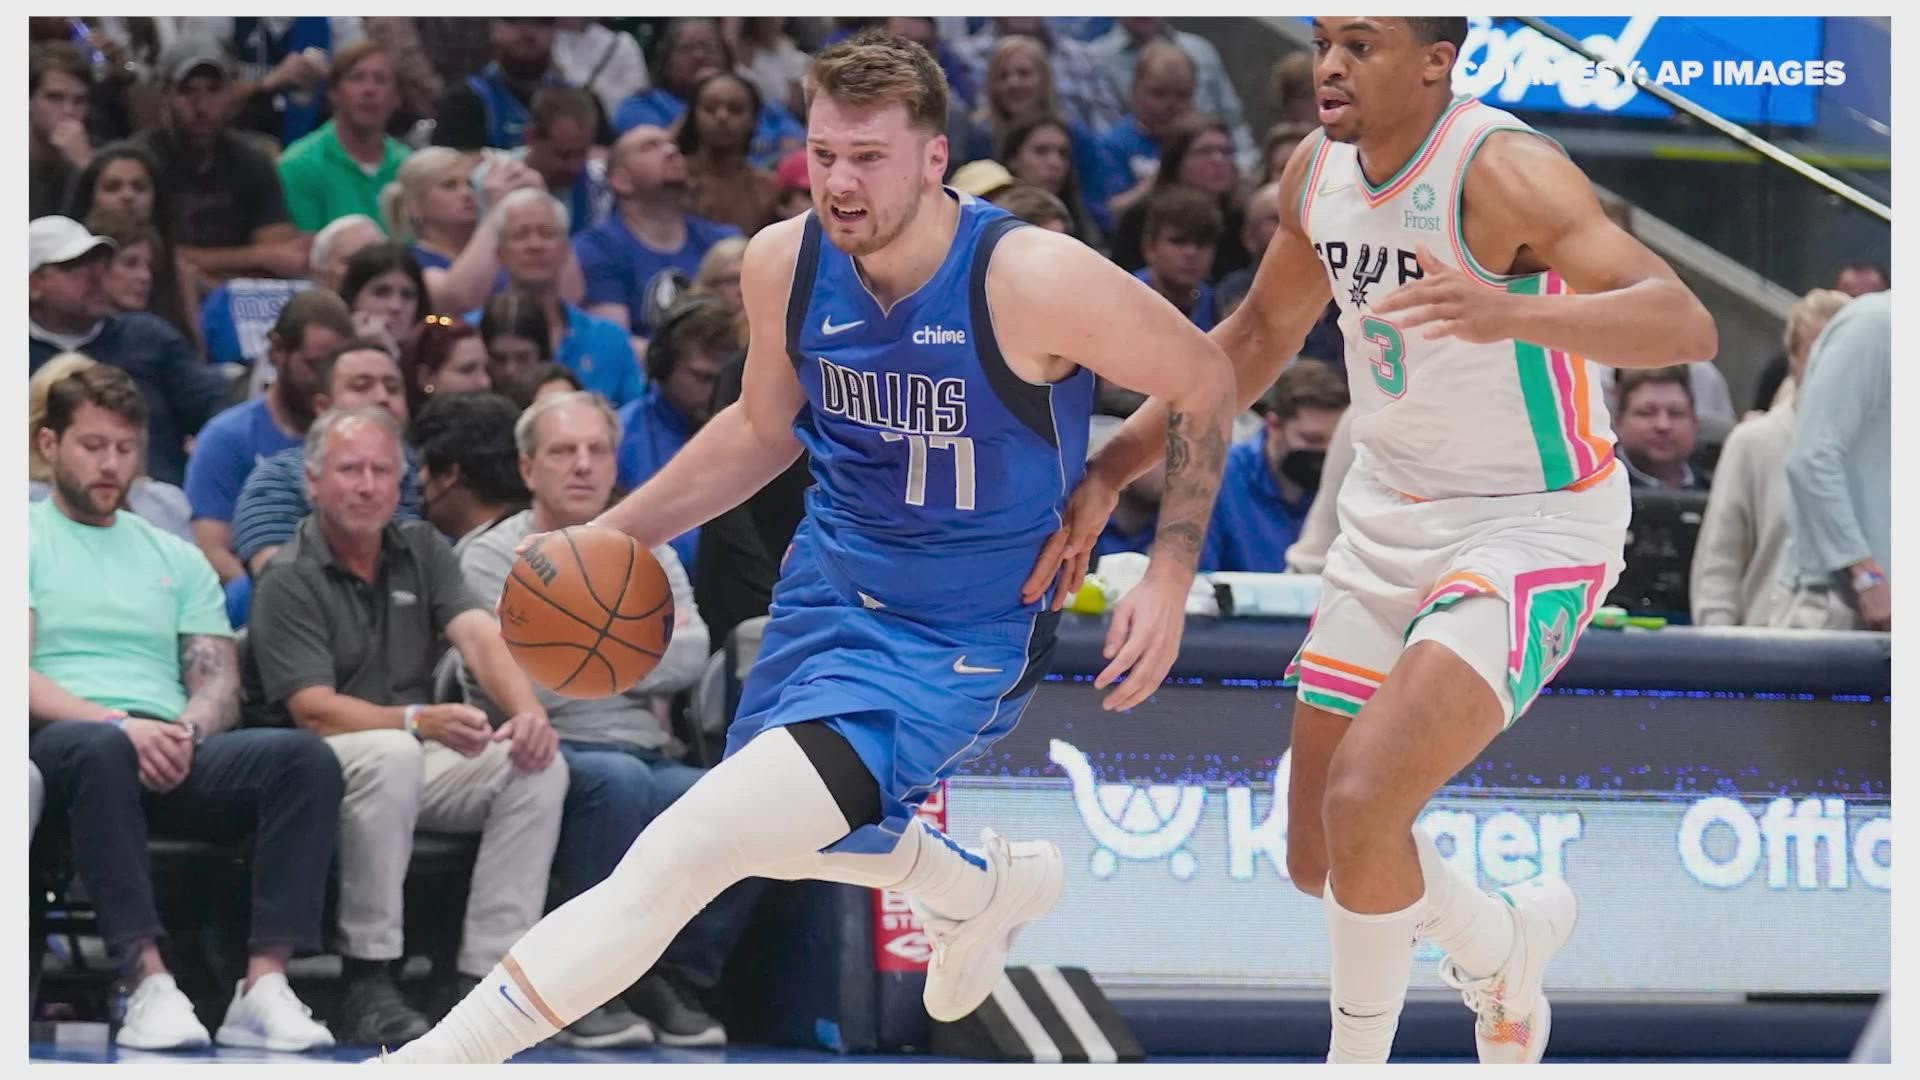 Luka Doncic injured his calf during the game against the San Antonio Spurs. With the playoffs starting Saturday, many are now wondering how long he'll be sidelined.